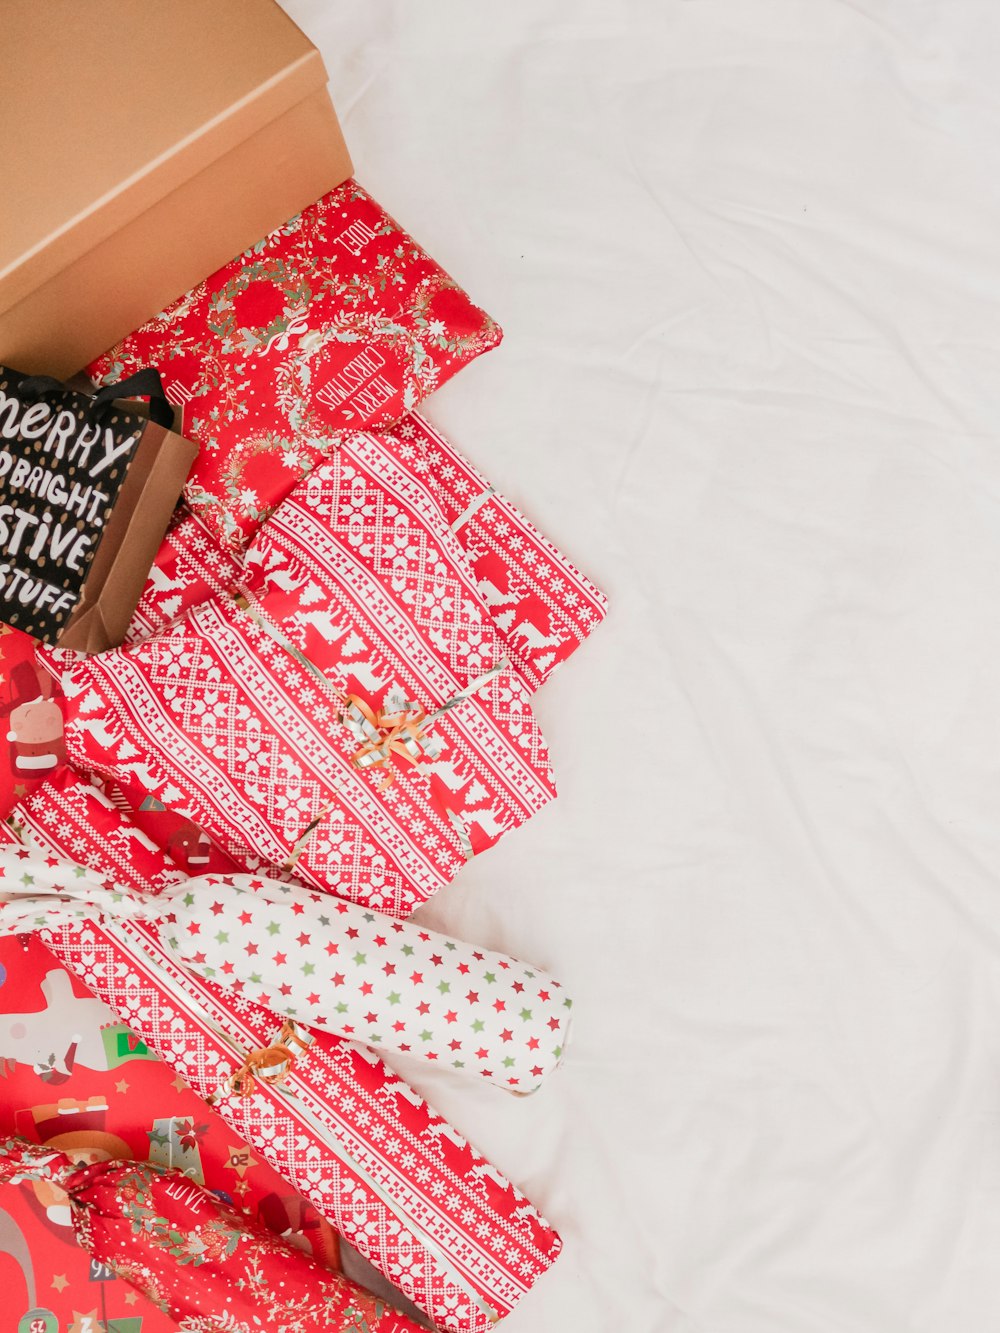 Christmas gifts on bed